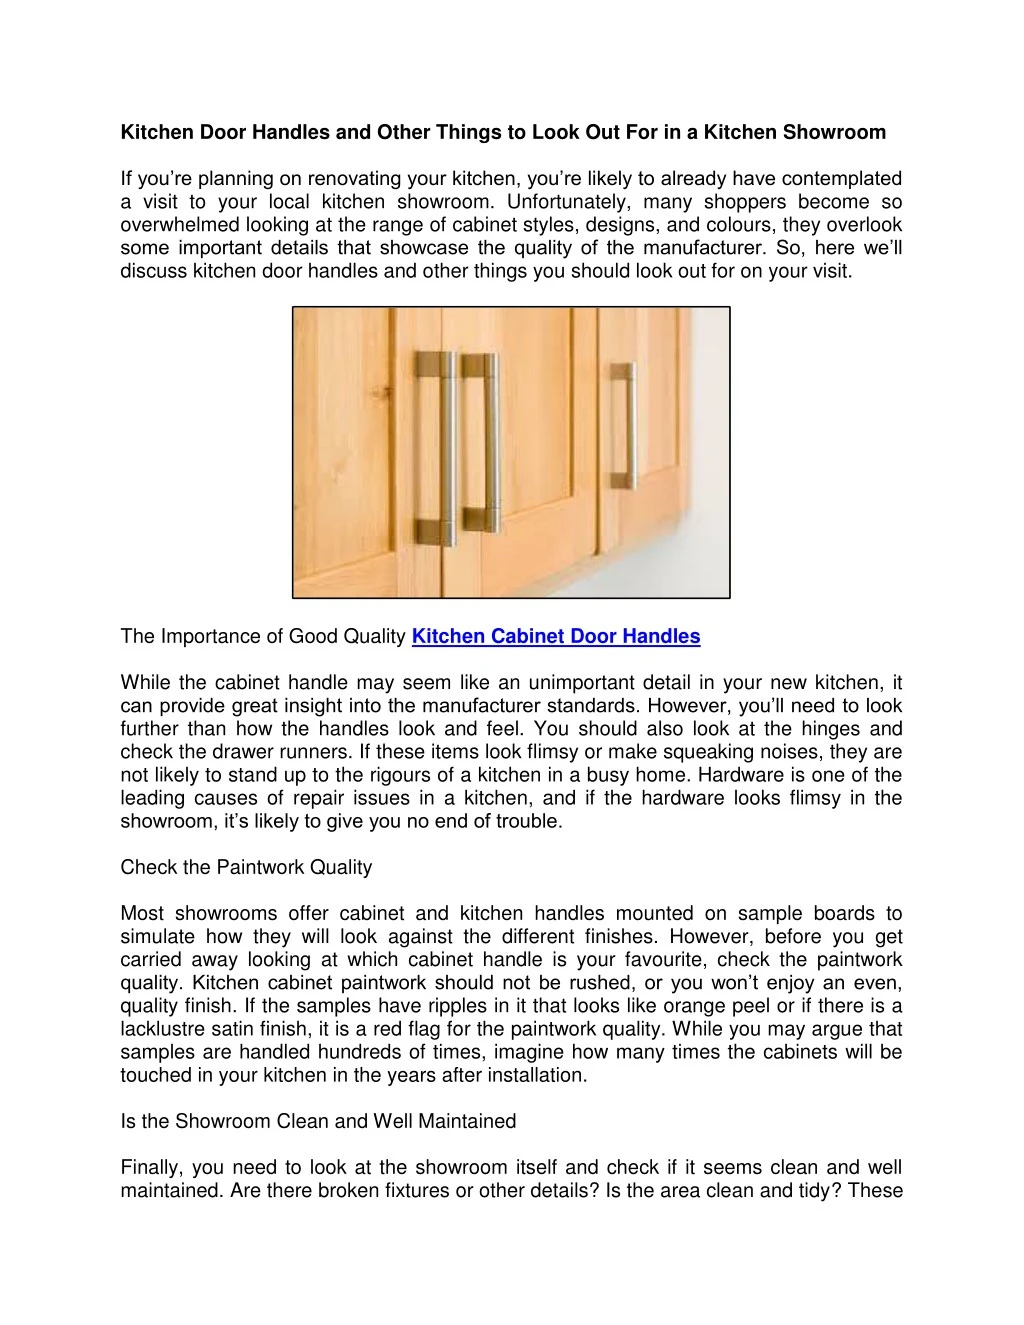 kitchen door handles and other things to look